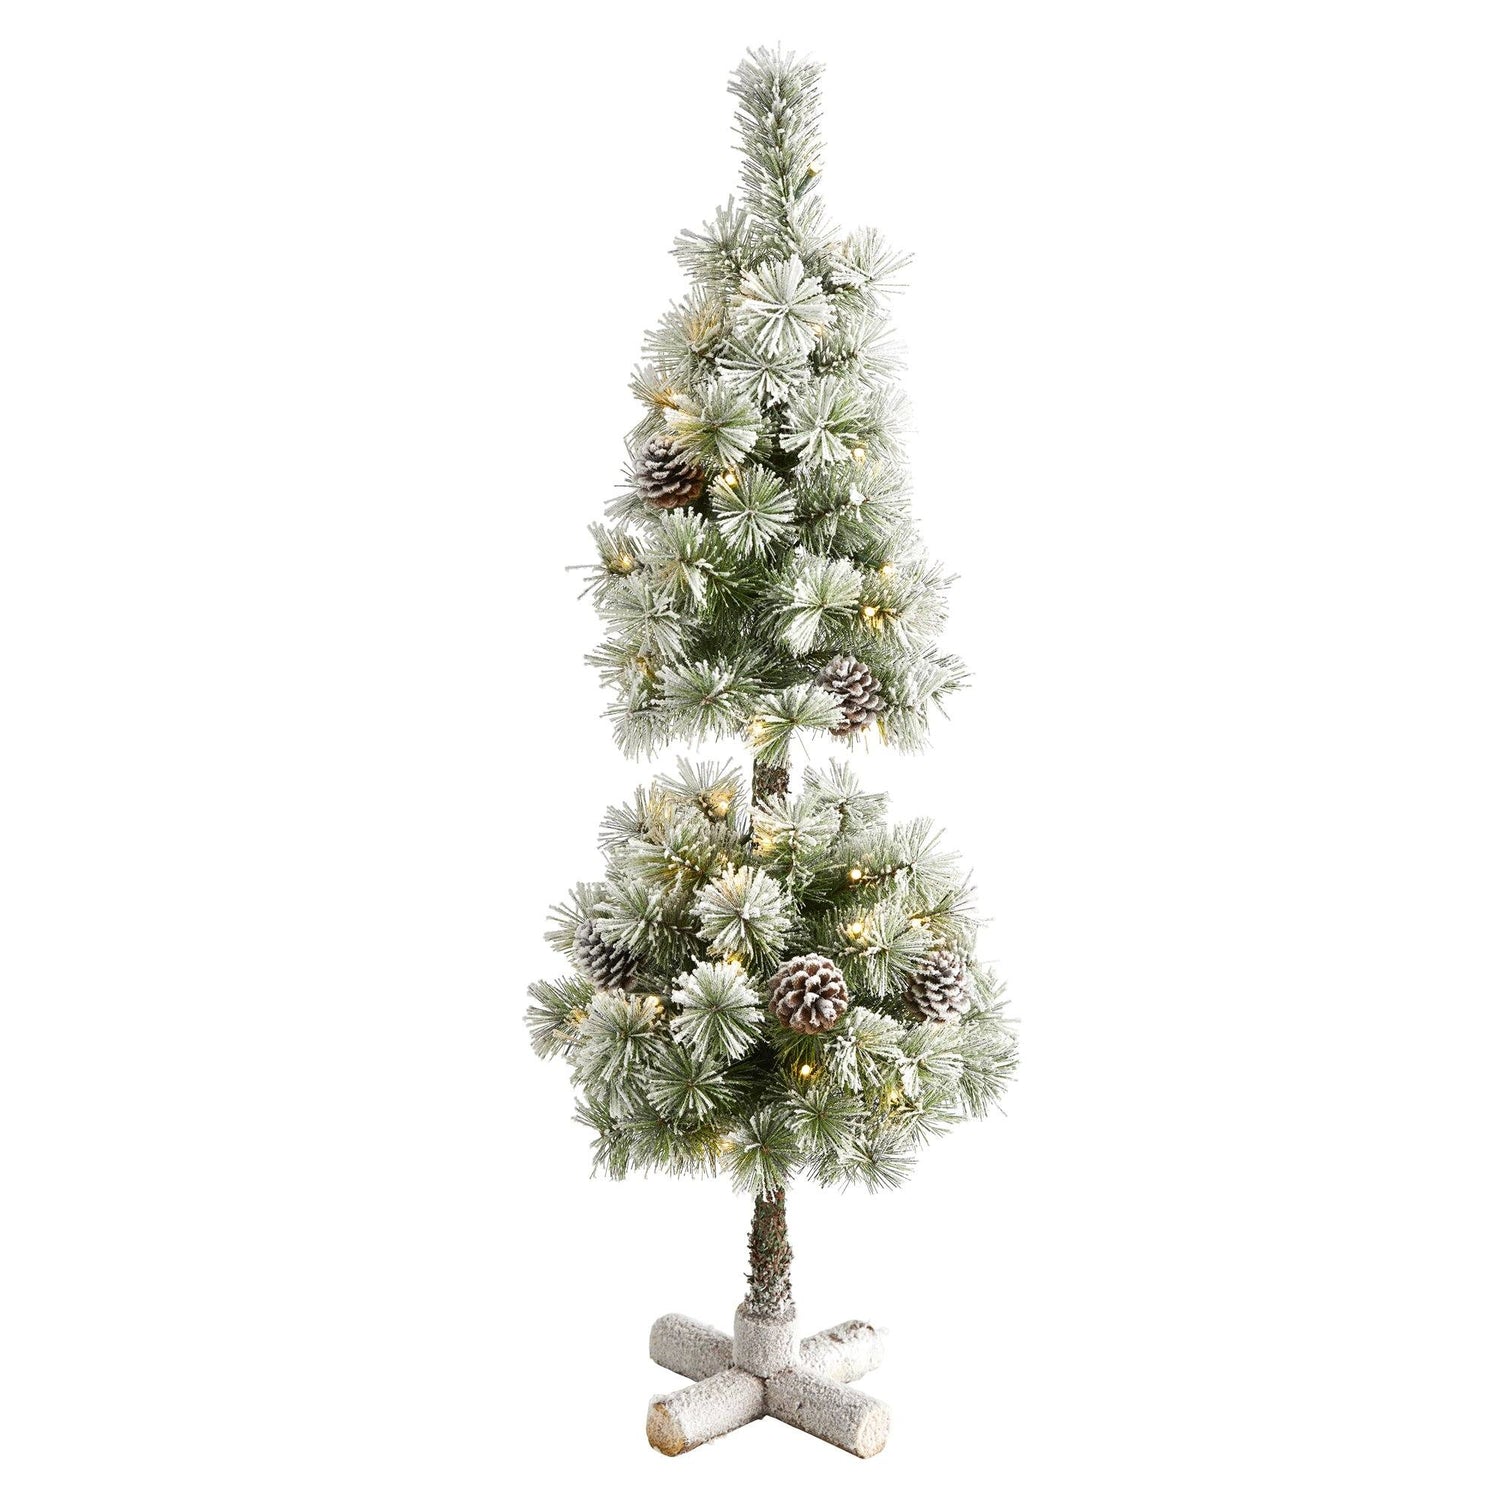 3’ Flocked Artificial Christmas Tree Topiary with 50 Warm White LED Lights and Pine Cones